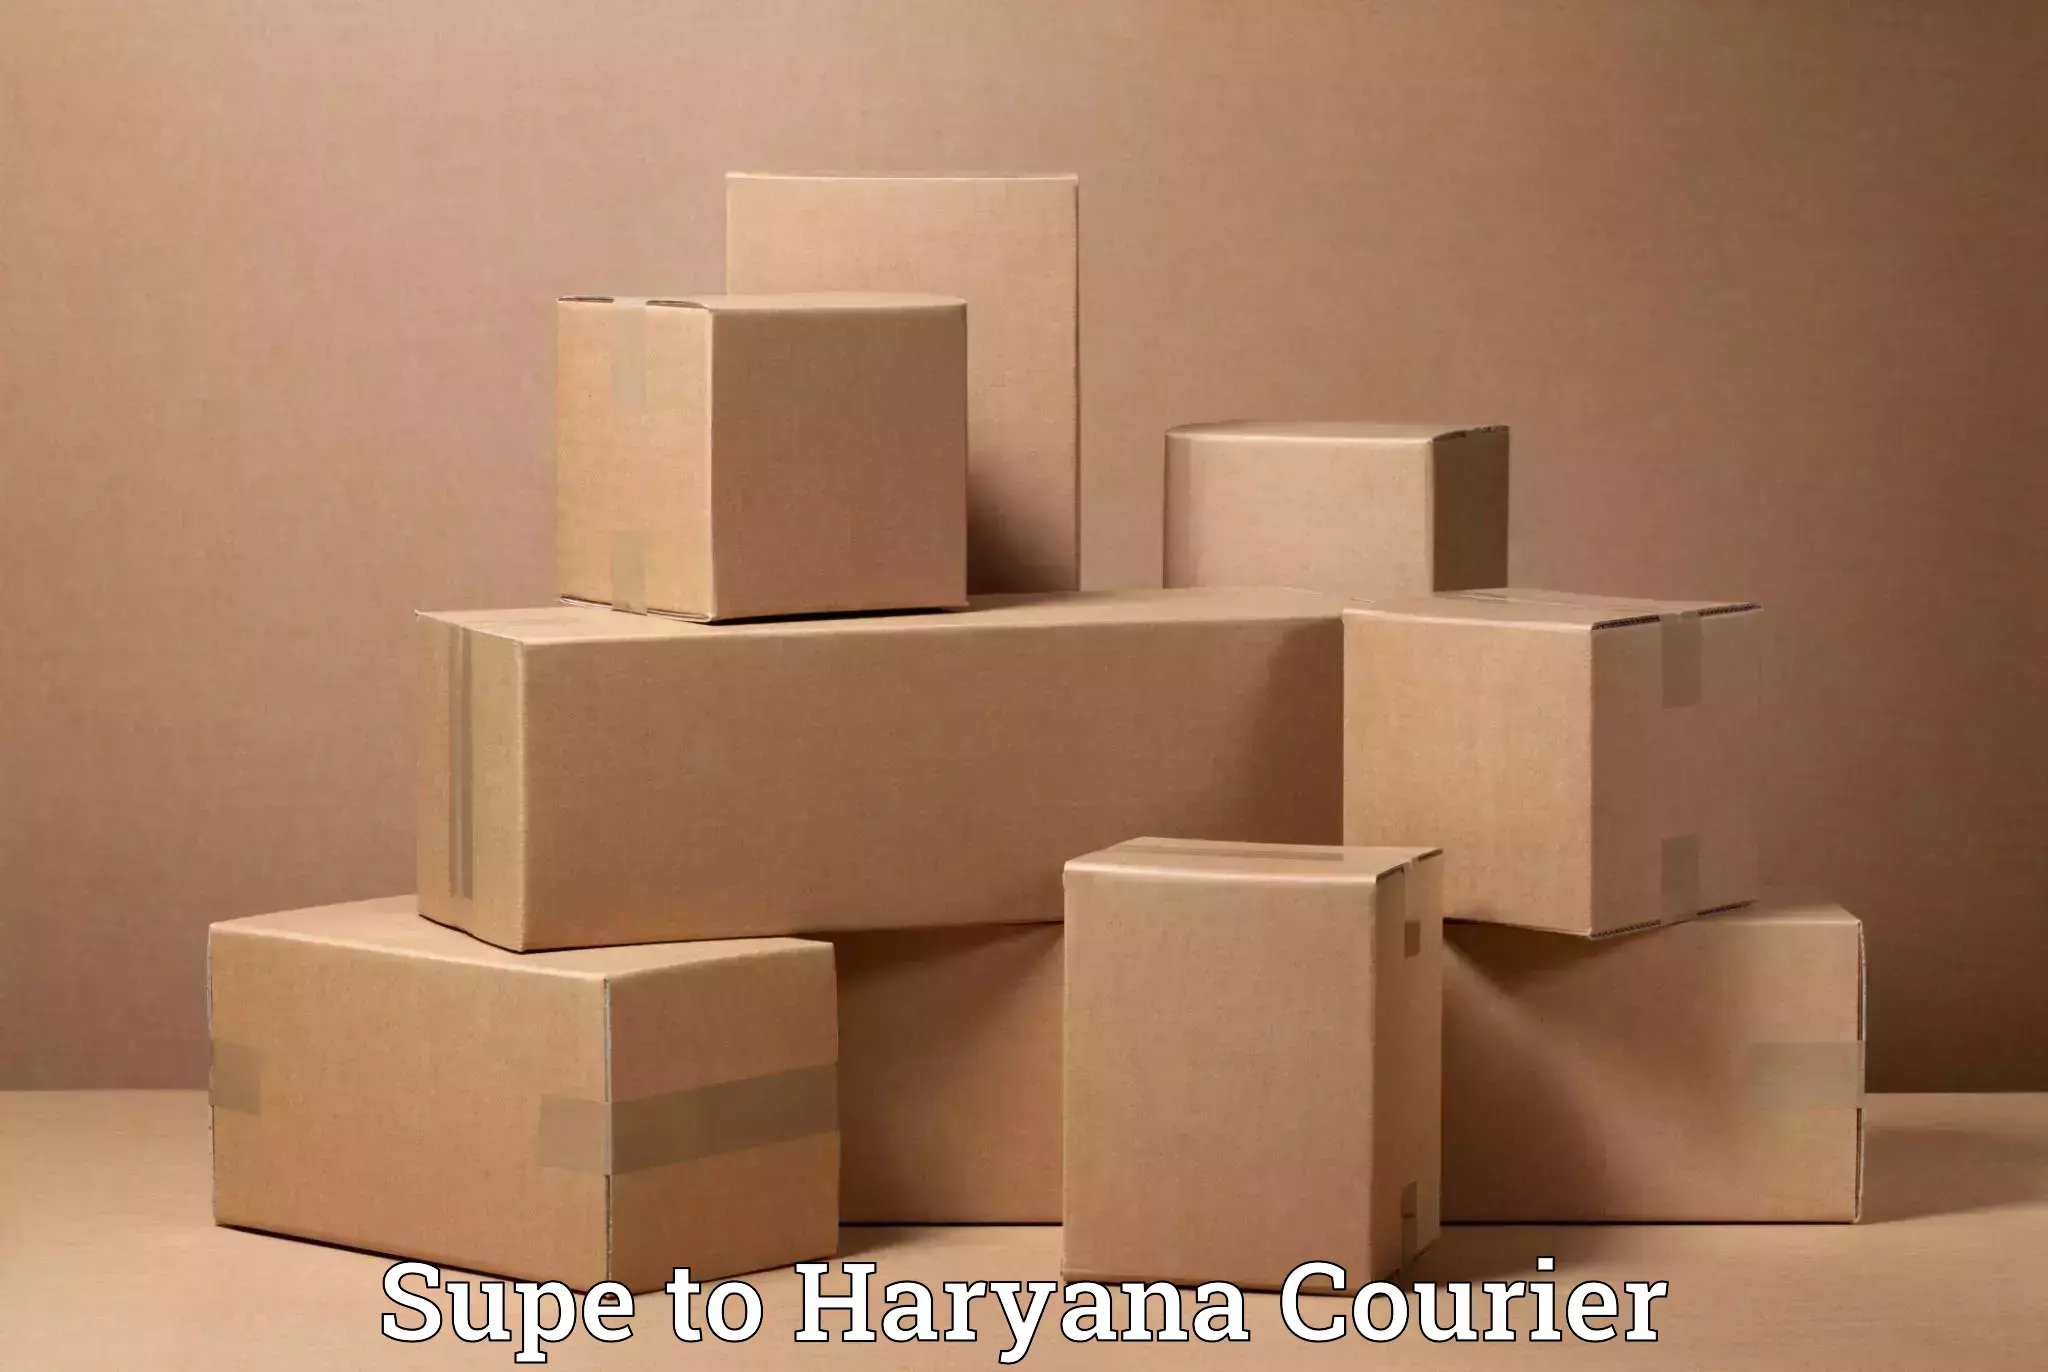 Skilled furniture transporters Supe to Haryana